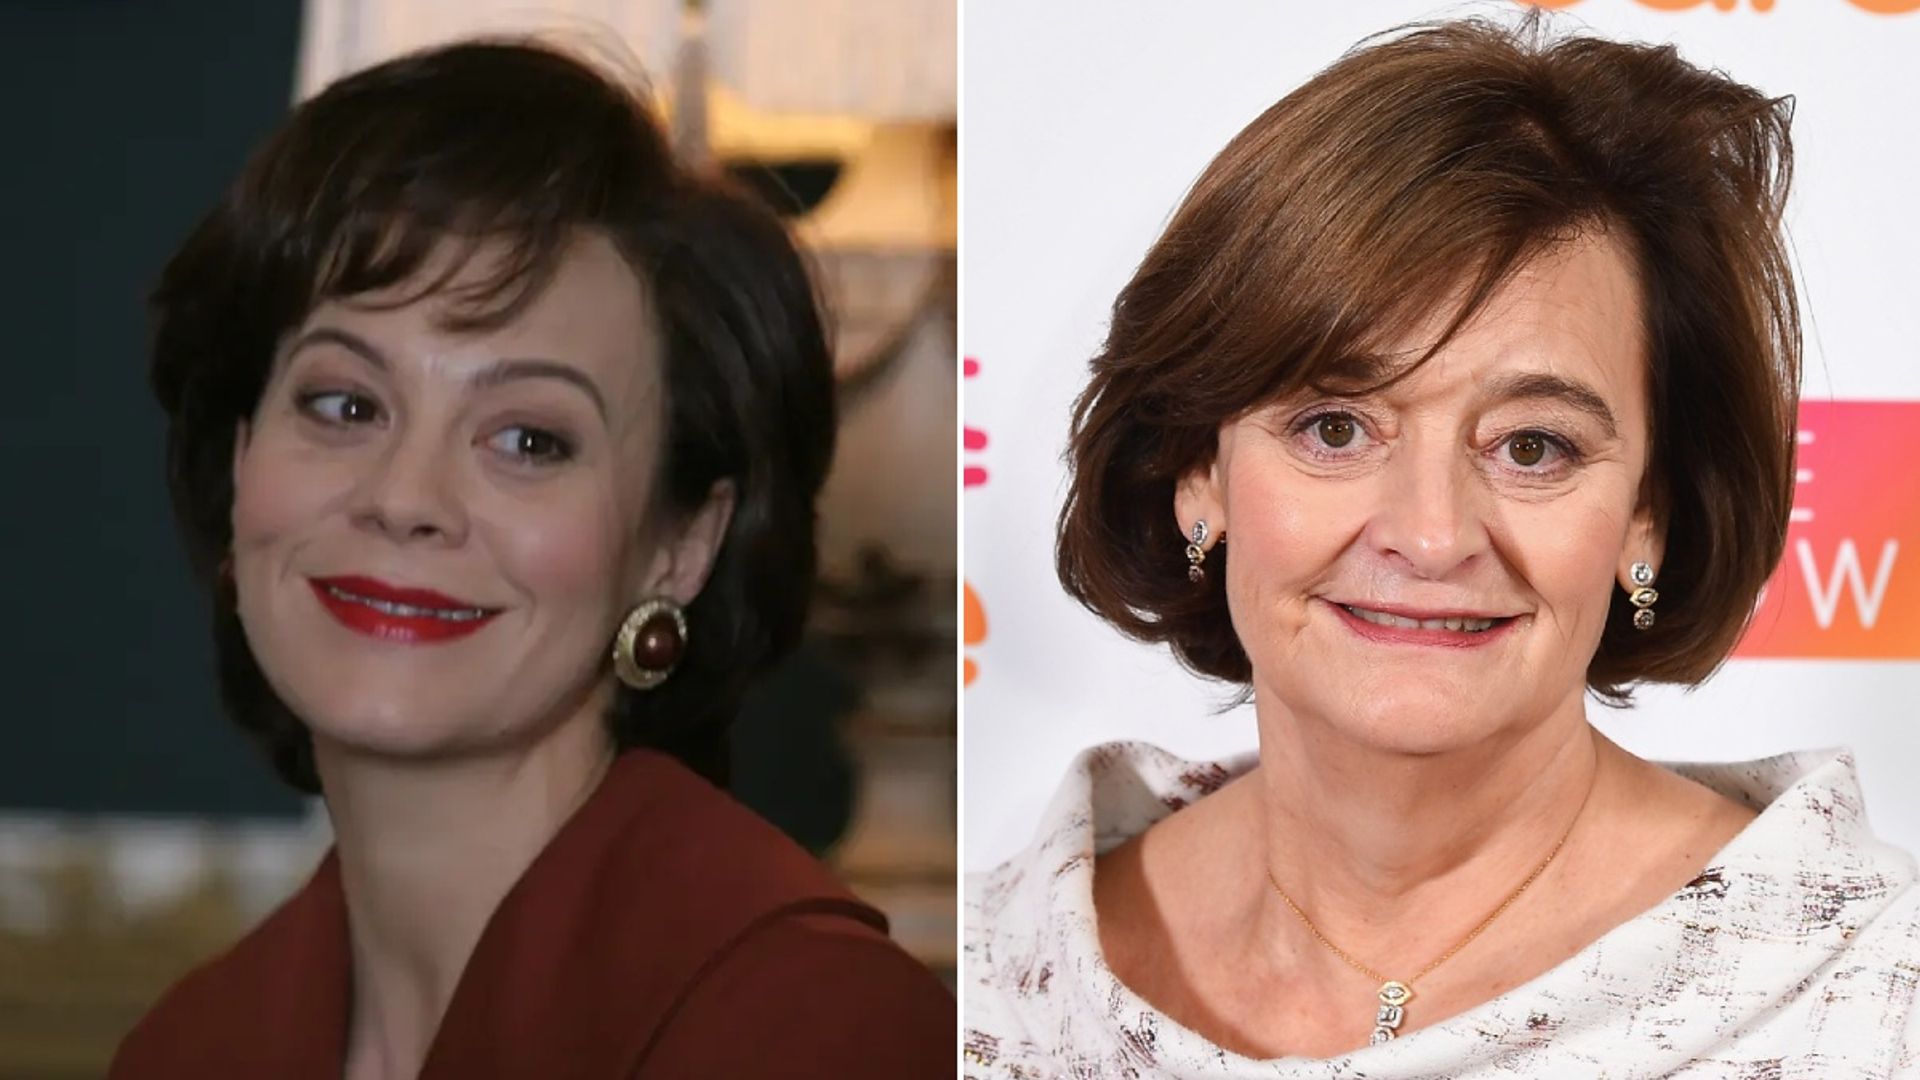 Cherie Blair pays tribute to 'amazing' Helen McCrory who portrayed Tony Blair's wife in two films